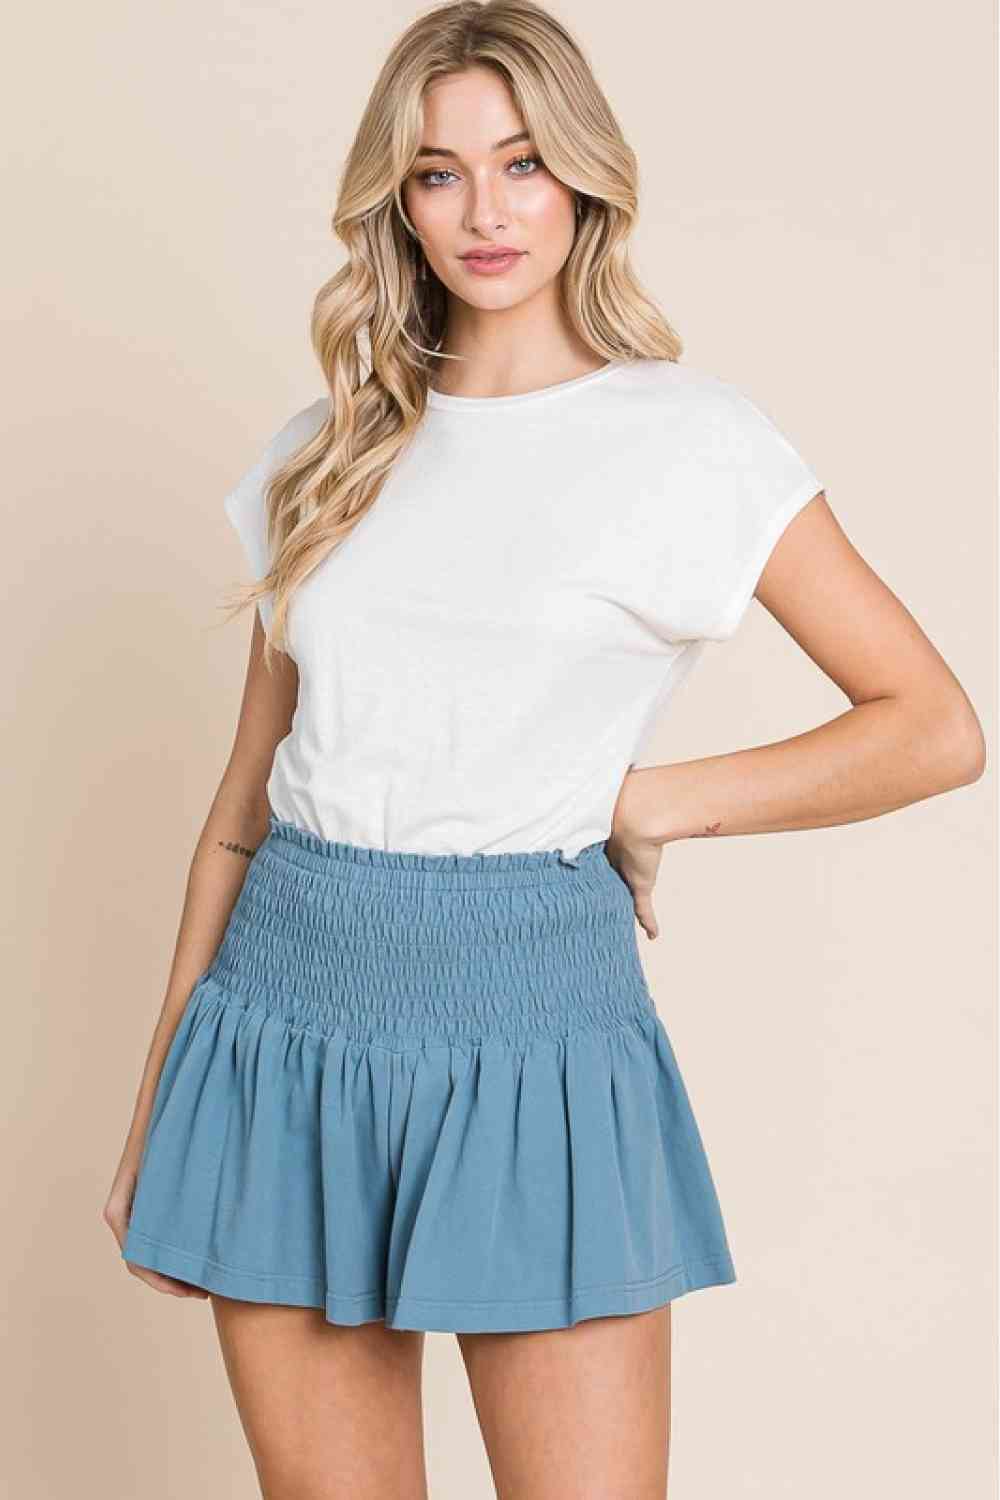 Mineral Washed Smocked Shorts - All Sizes